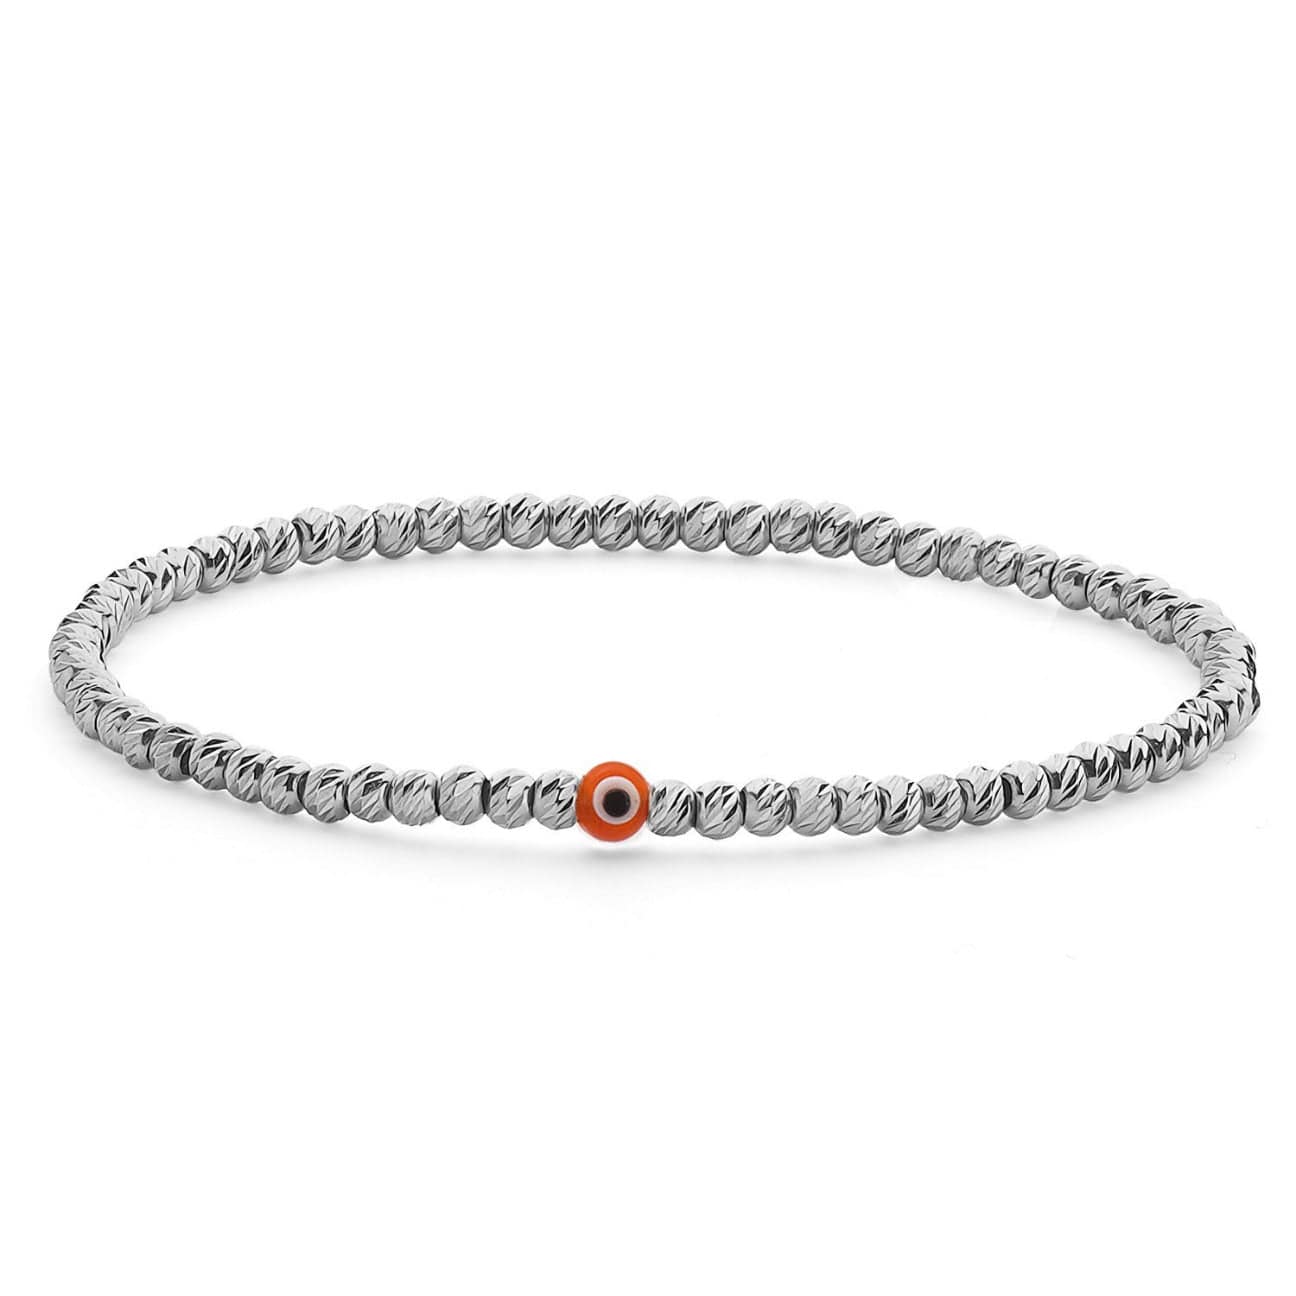 Bead Bracelet with Evil Eye - Silver and Red - Golden Tangerine